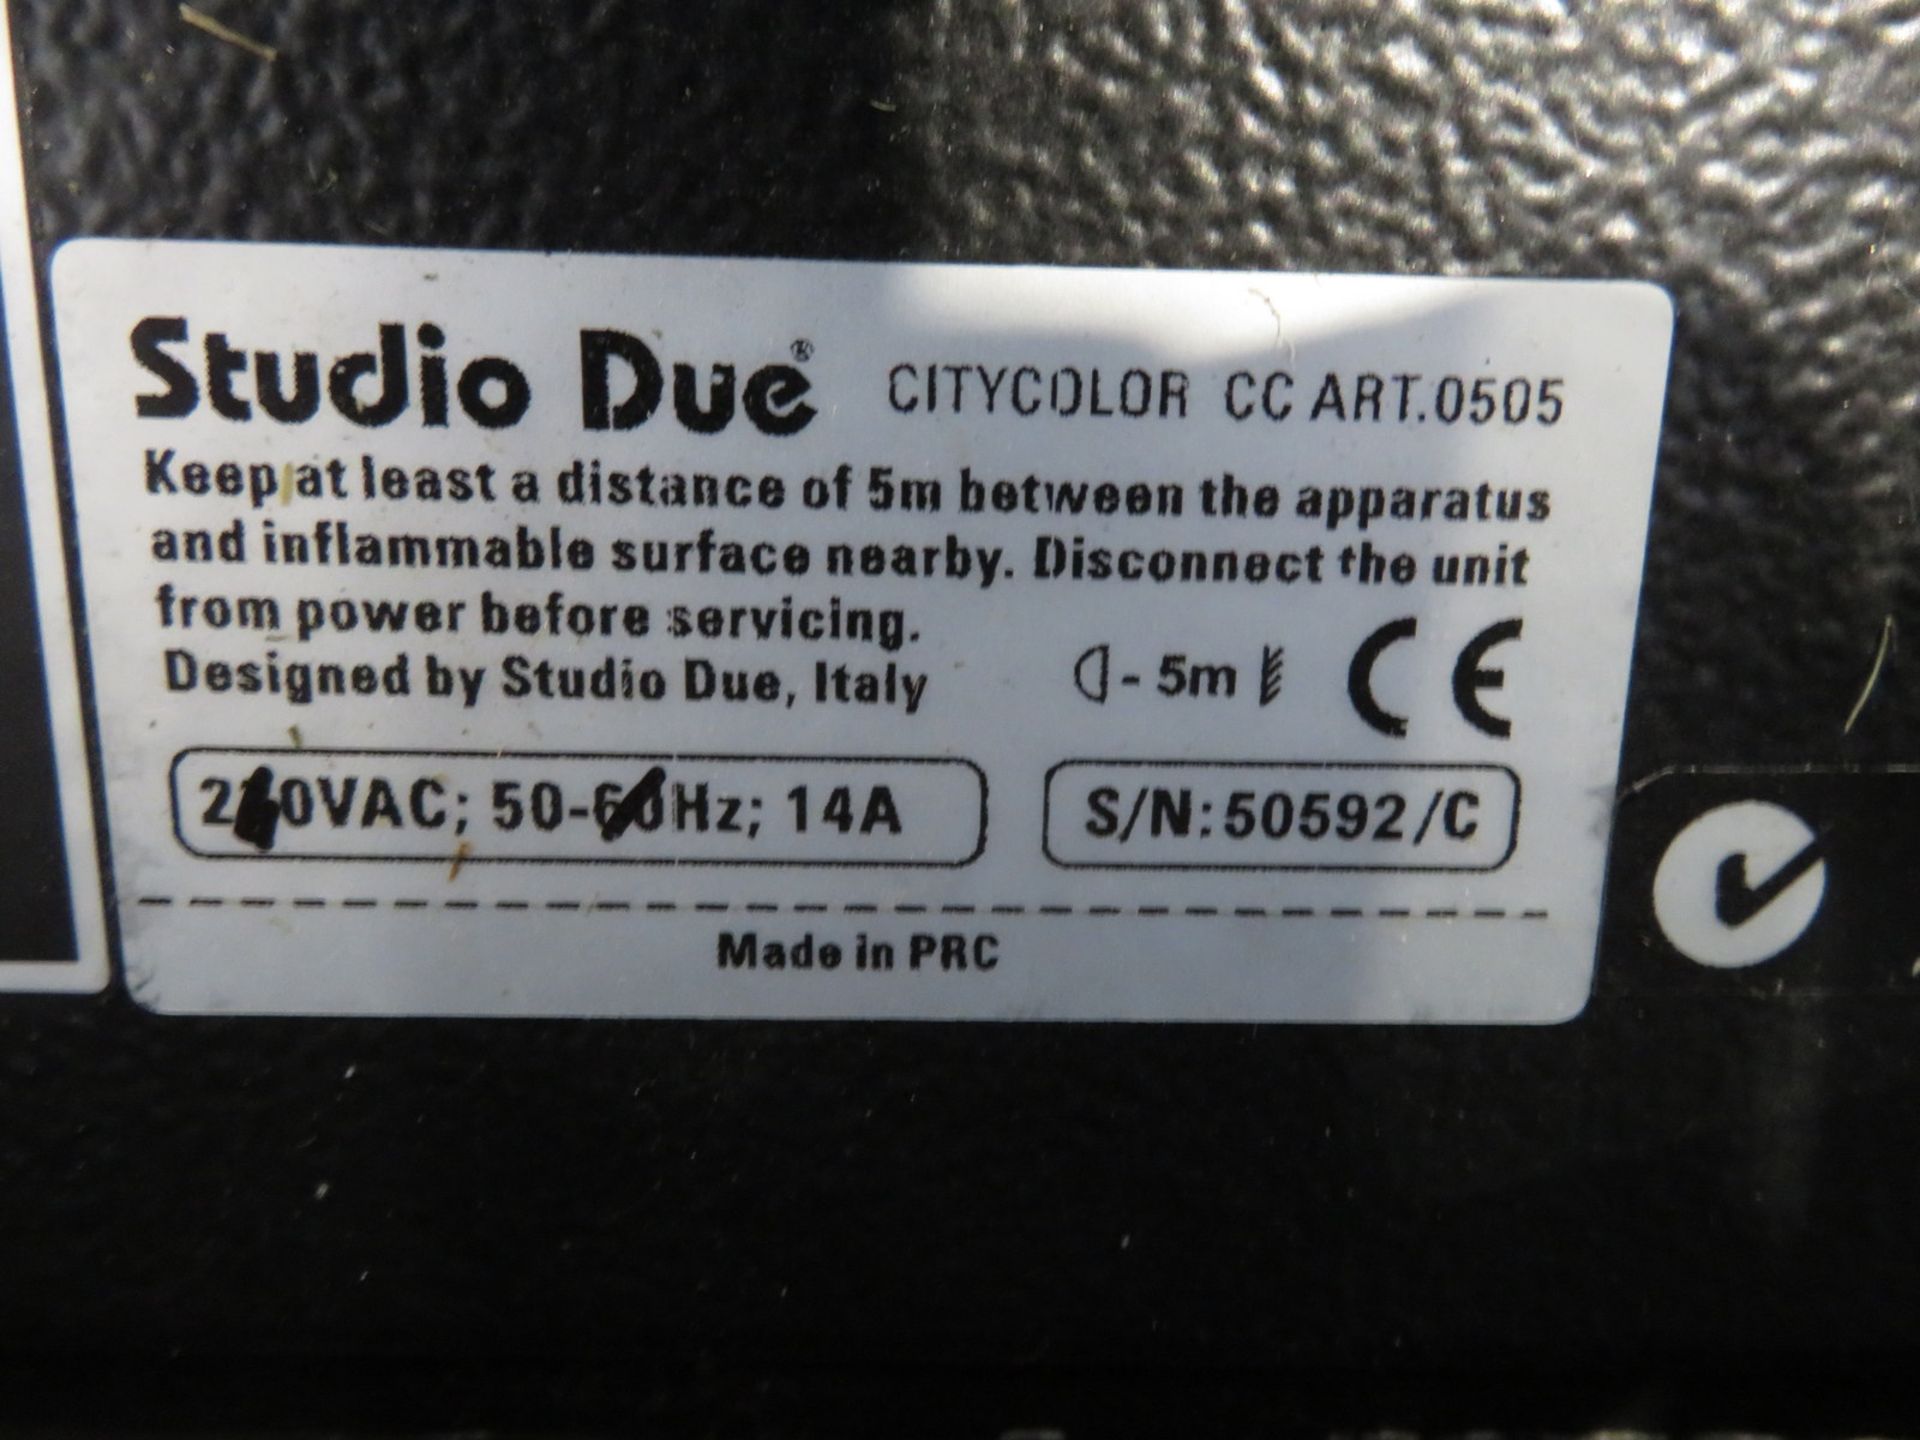 Studio Due City Colour 2500 Wash in flightcase. Working condition. Hours: 1279. - Image 5 of 9